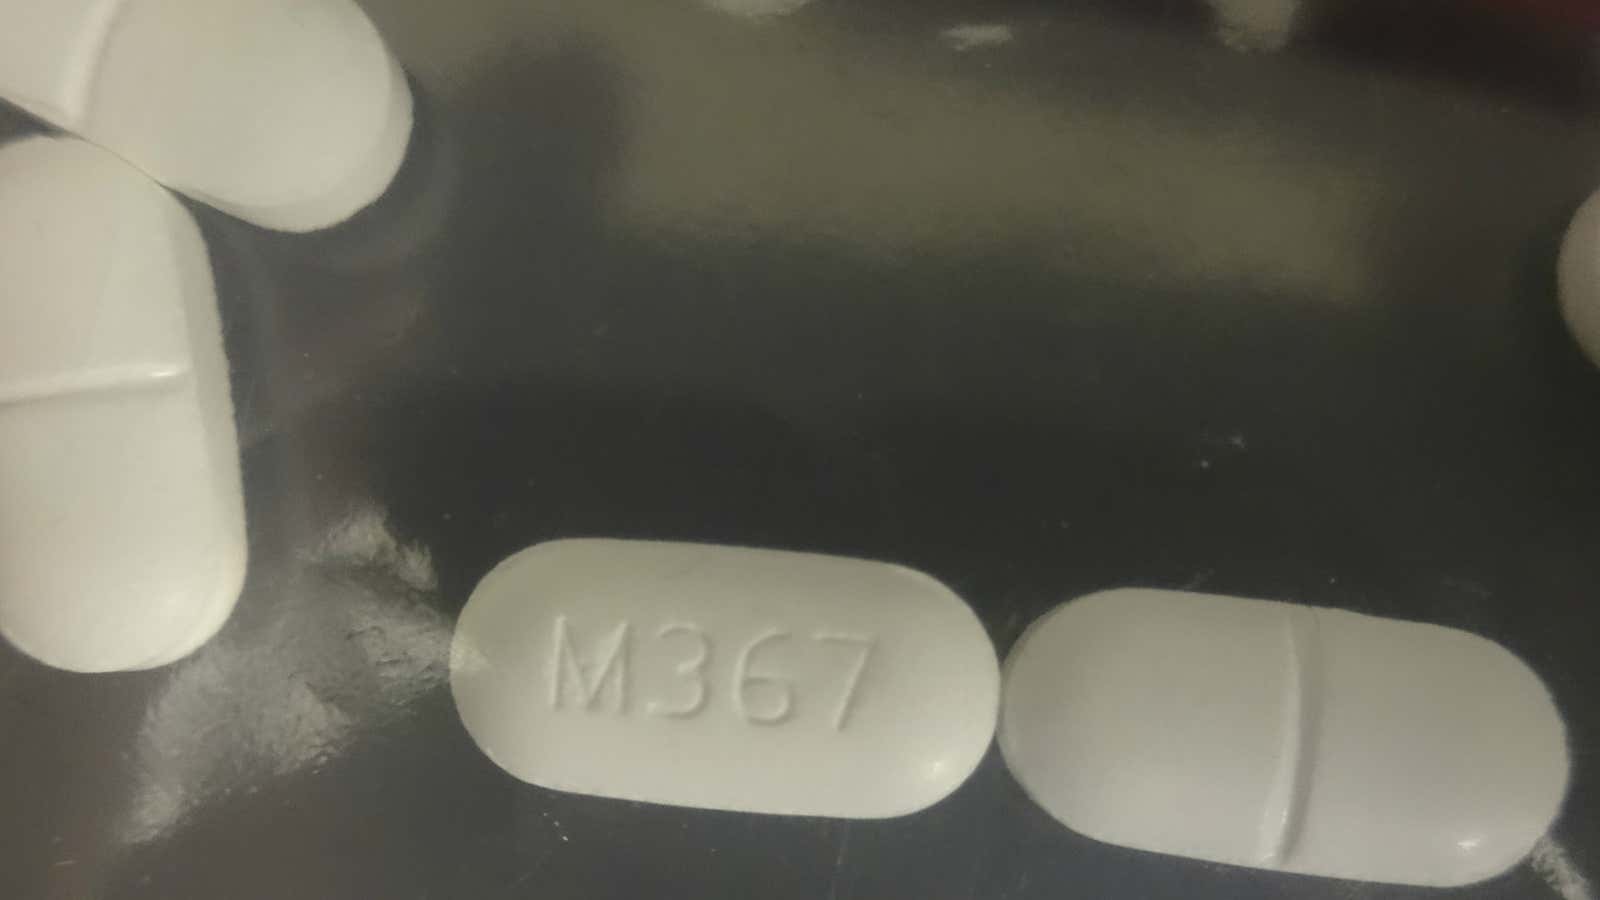 Counterfeit hydrocodone seized by US authorities.